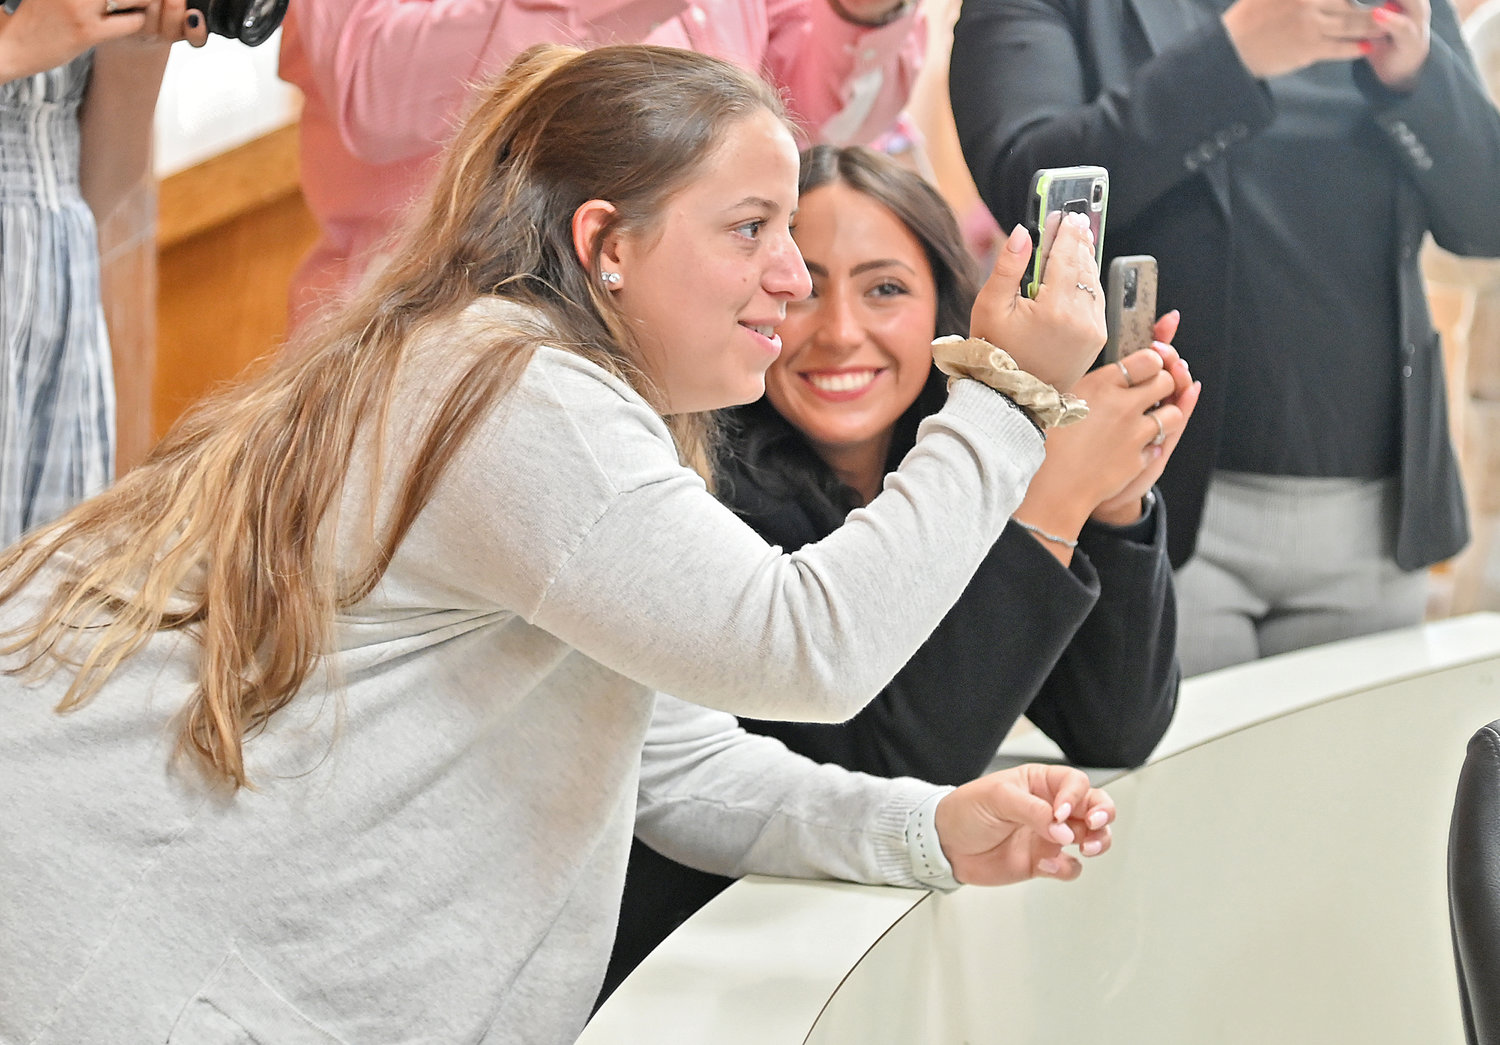 PROUD FAMILY — Gianna Cirasuolo and Gianna Calabrese, sister and girlfriend, respectively, of new recruit Michael Cirasuolo, get pictures of him signing the department's new member book at his swearing-in ceremony on Friday.